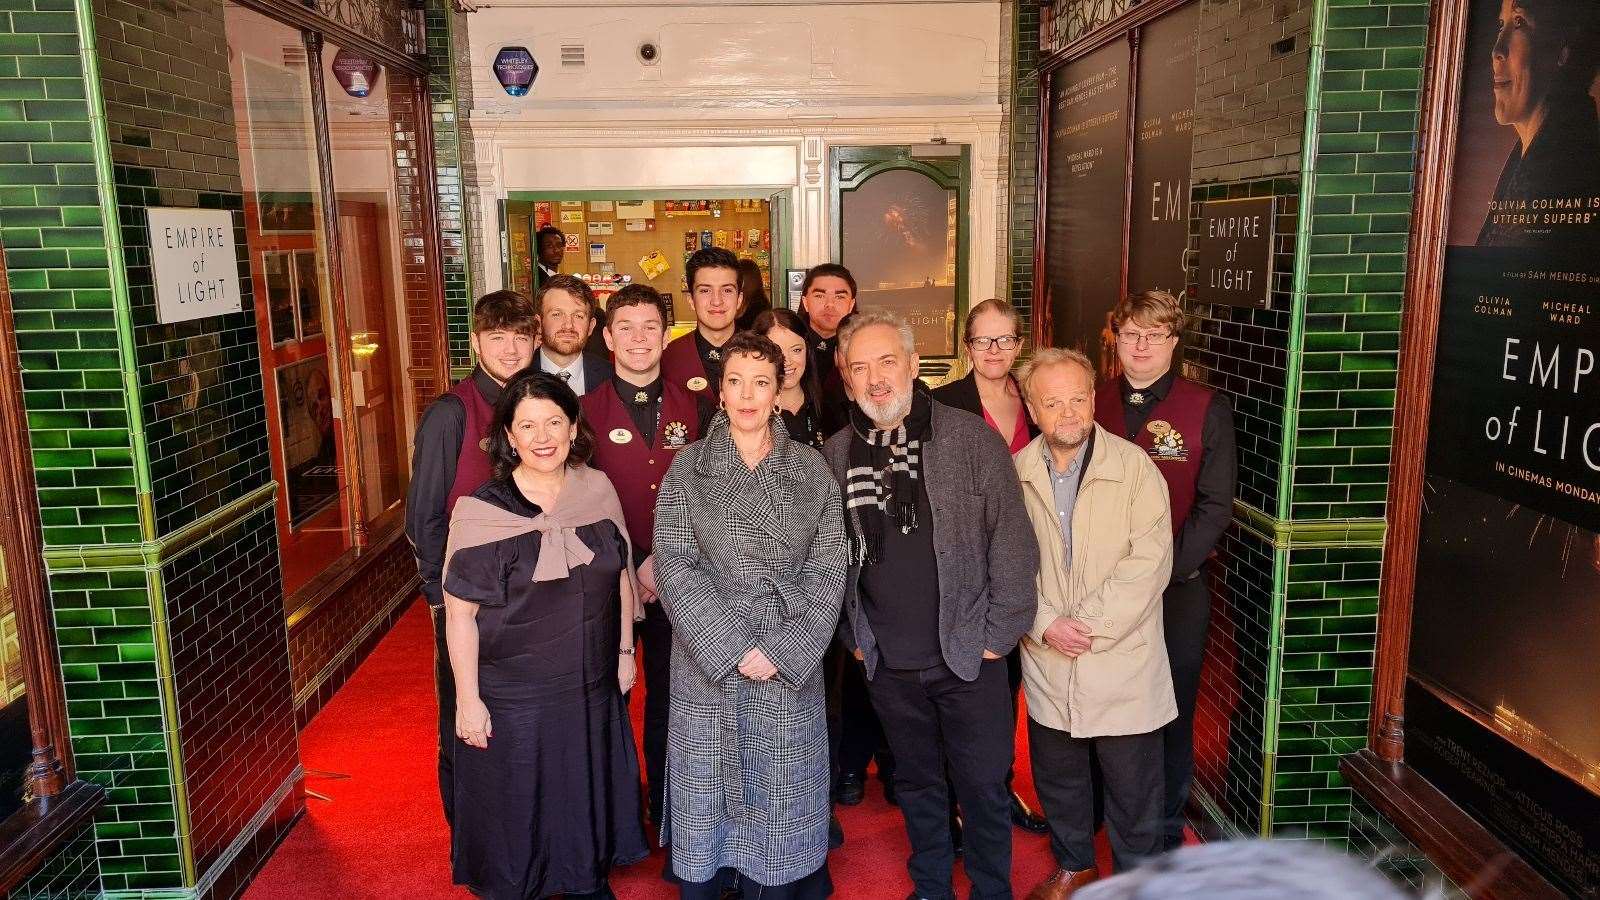 Front row, left to right: Pippa Harris, Olivia Colman, Sam Mendes and Toby Jones join others at The Carlton cinema in Westgate